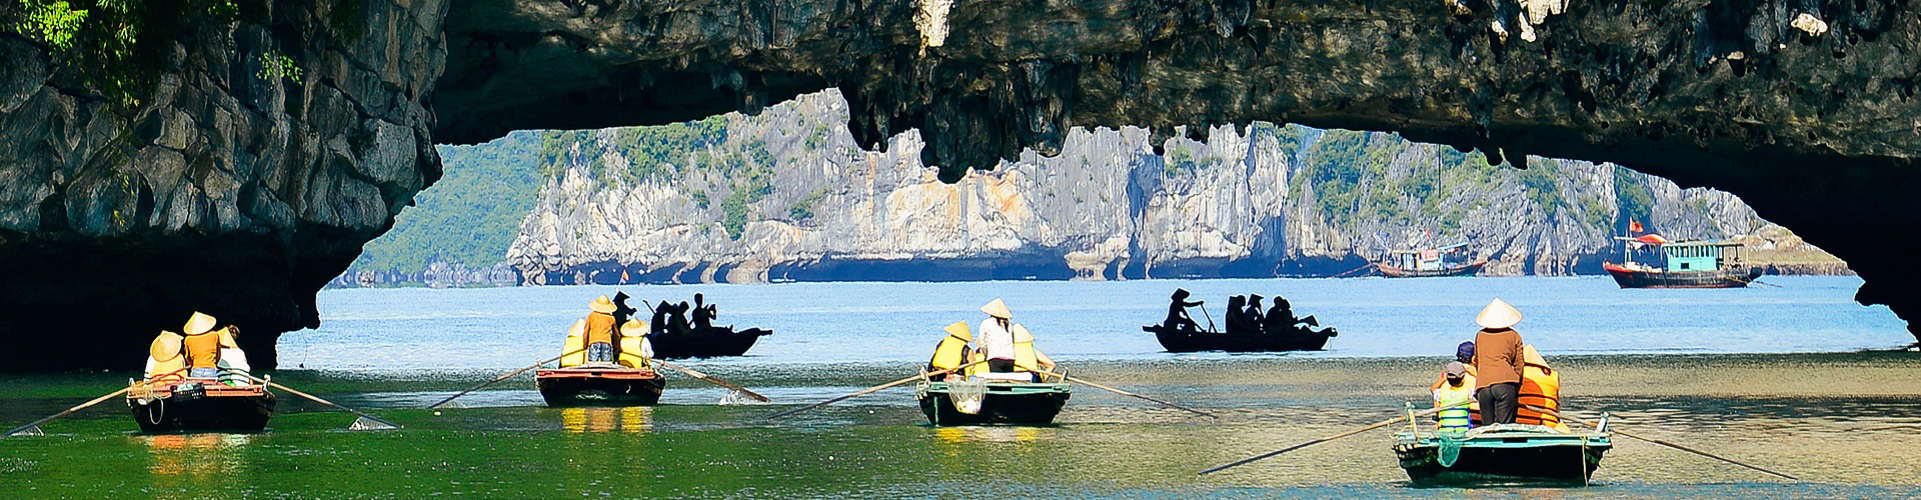 Luon Cave, A Heaven Gate in Halong Bay